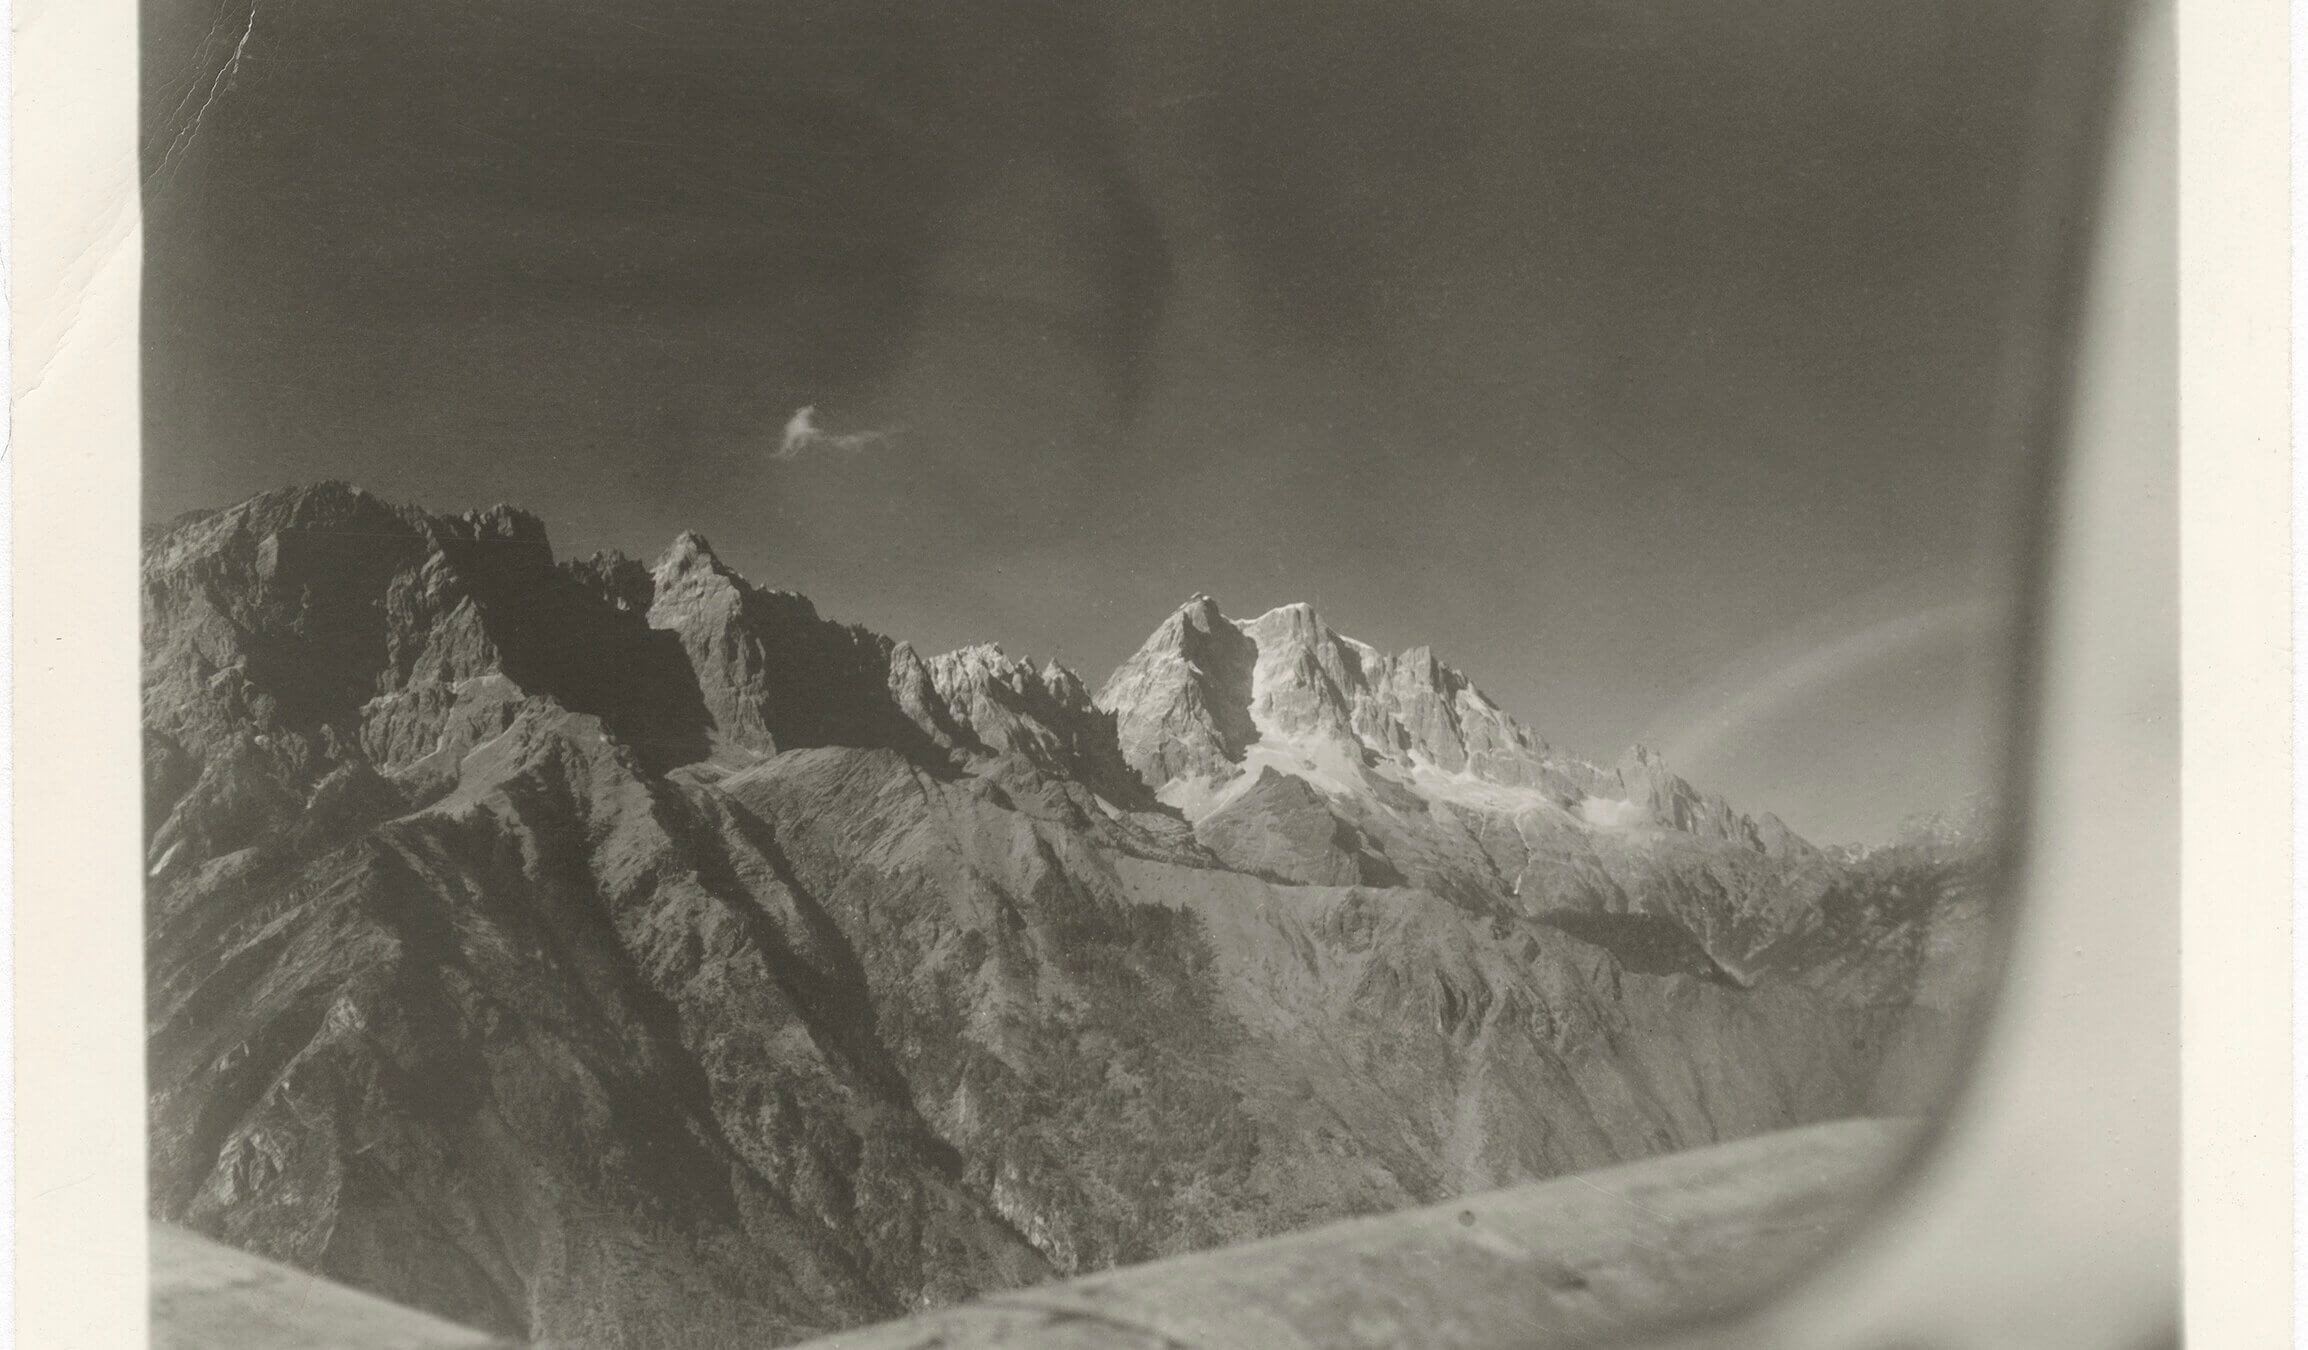 The view from a C-47 transport plane flying over the Himalayas,